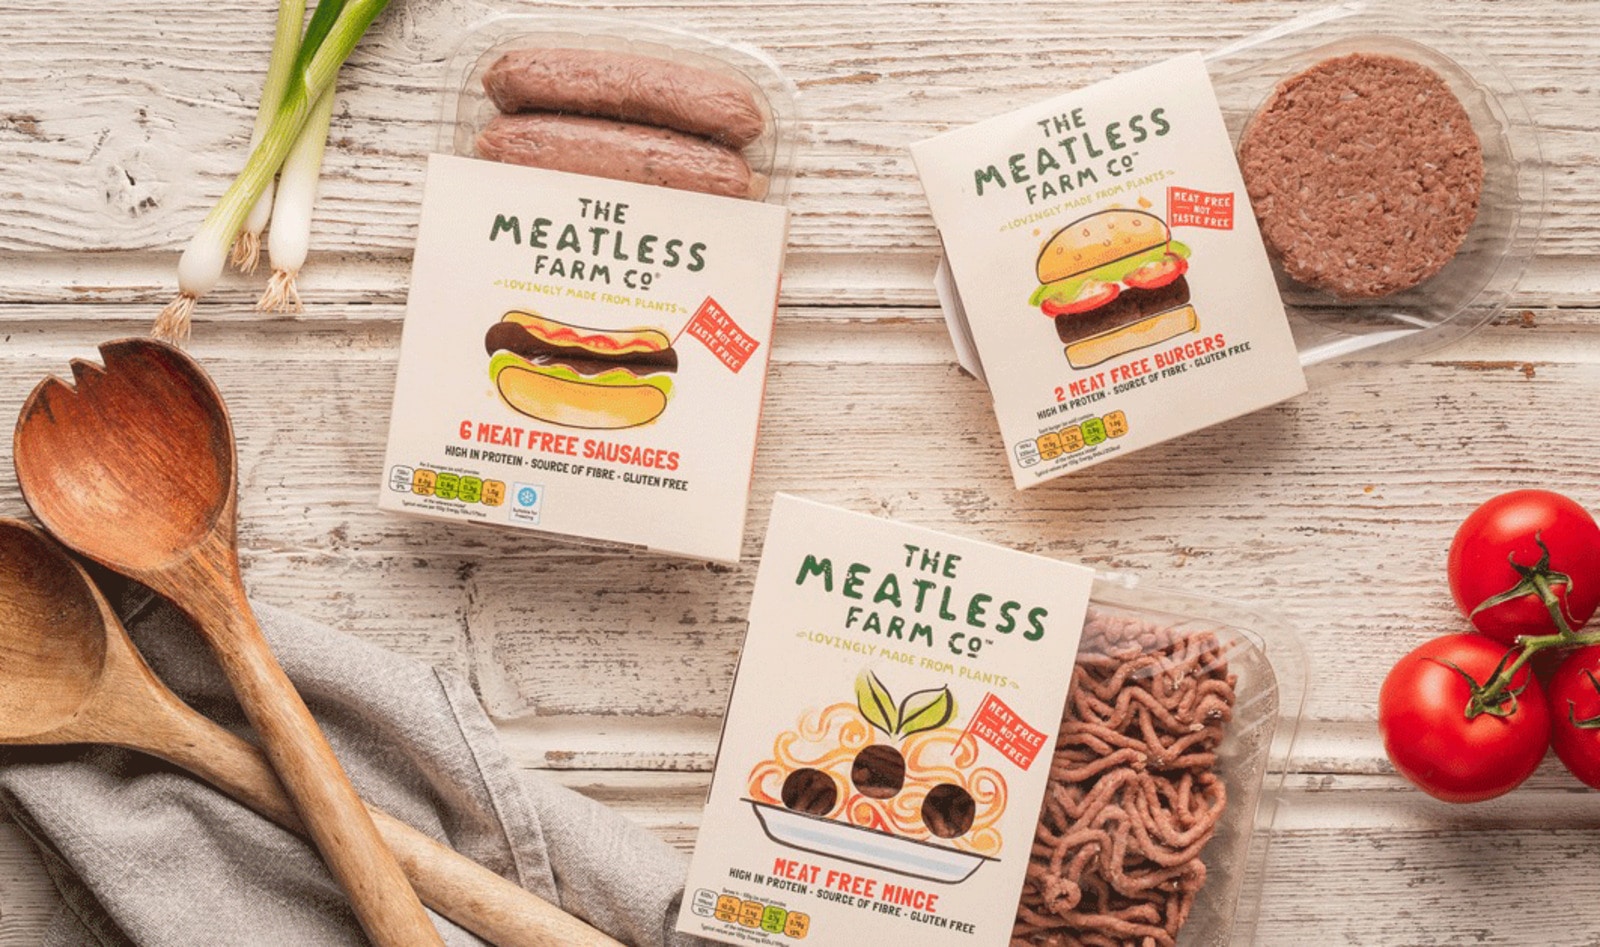 New Vegan Meat Line Debuts at 450 Whole Foods Nationwide